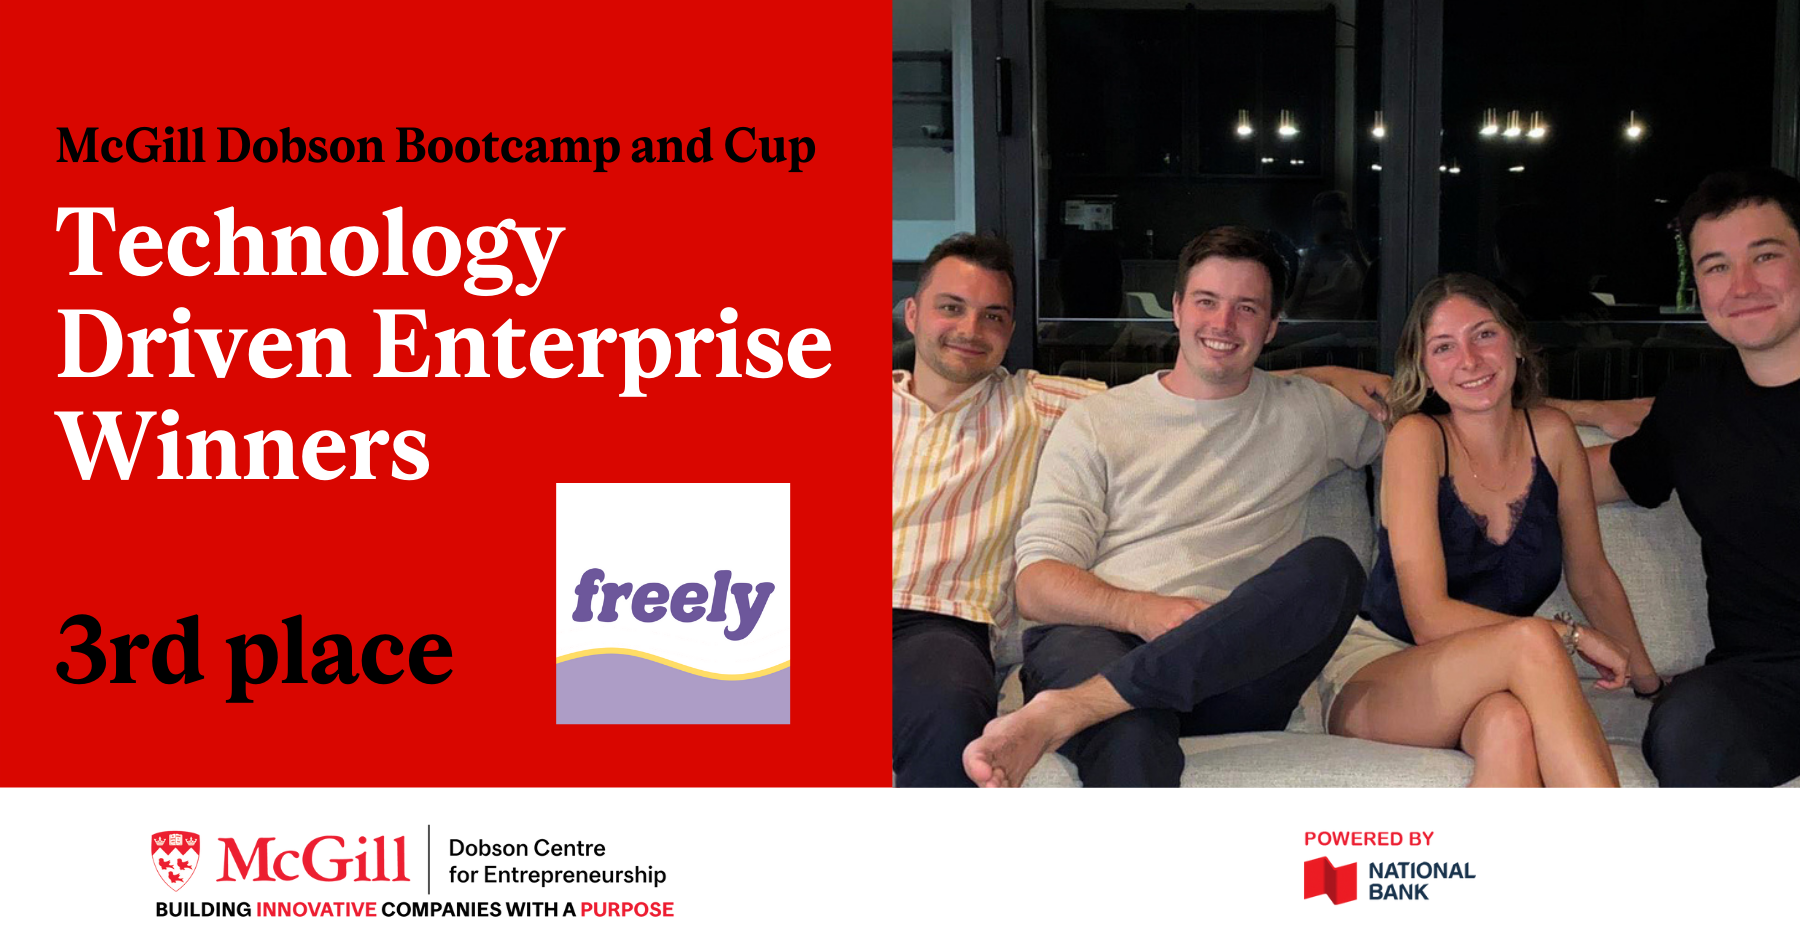 Technology Driven Enterprise Track 3rd place winners freely